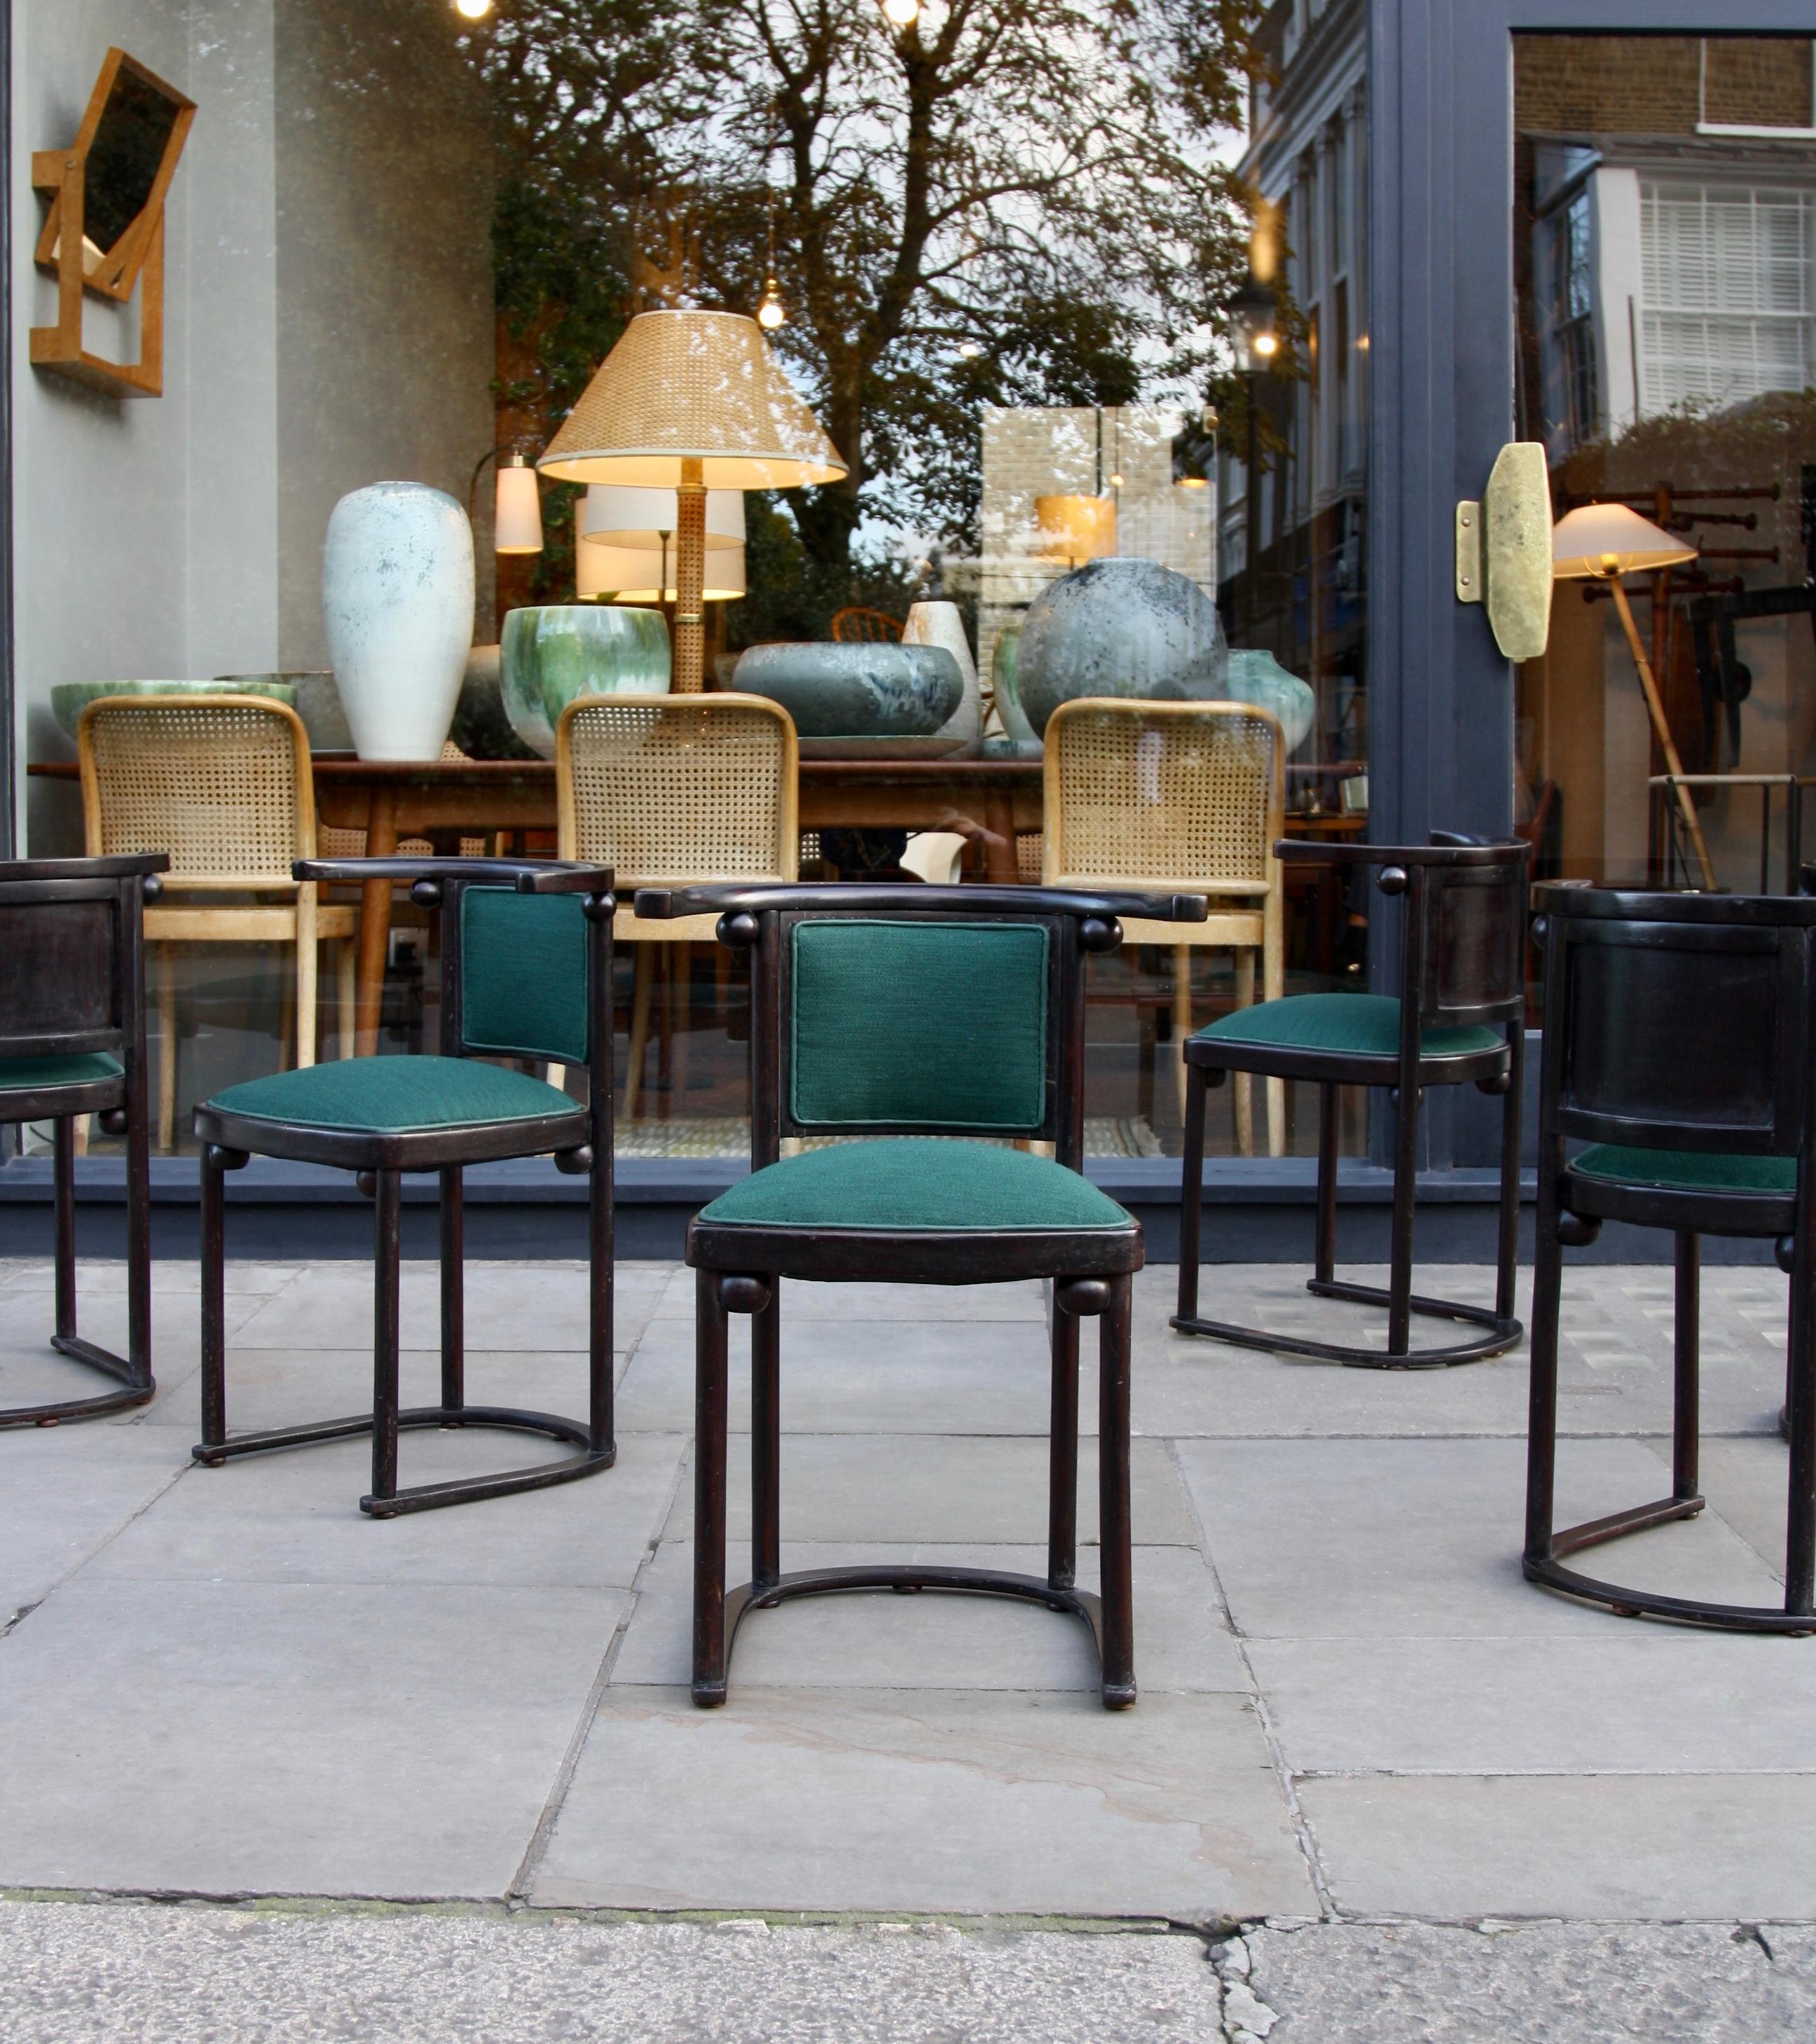 Vienna Secession Six Early 1st Edition Black Lacquer Fledermaus Chairs, Josef Hoffmann circa 1910